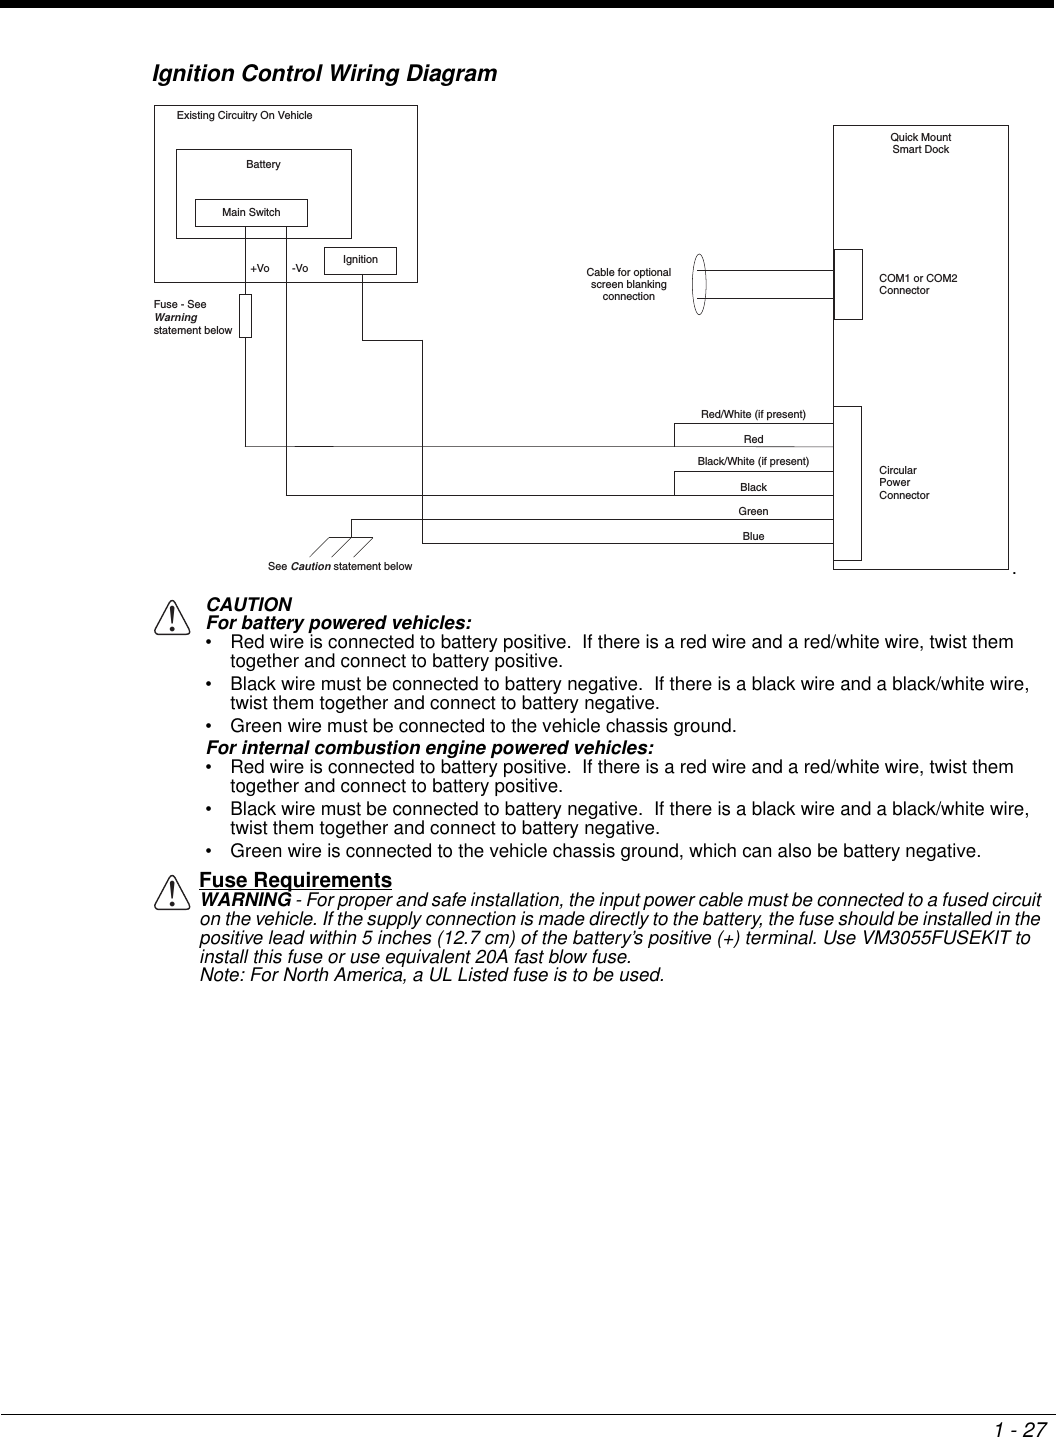 1 - 27Ignition Control Wiring Diagram.CAUTIONFor battery powered vehicles:• Red wire is connected to battery positive.  If there is a red wire and a red/white wire, twist them together and connect to battery positive.• Black wire must be connected to battery negative.  If there is a black wire and a black/white wire, twist them together and connect to battery negative.• Green wire must be connected to the vehicle chassis ground.For internal combustion engine powered vehicles:• Red wire is connected to battery positive.  If there is a red wire and a red/white wire, twist them together and connect to battery positive.• Black wire must be connected to battery negative.  If there is a black wire and a black/white wire, twist them together and connect to battery negative.• Green wire is connected to the vehicle chassis ground, which can also be battery negative.Fuse RequirementsWARNING - For proper and safe installation, the input power cable must be connected to a fused circuit on the vehicle. If the supply connection is made directly to the battery, the fuse should be installed in the positive lead within 5 inches (12.7 cm) of the battery’s positive (+) terminal. Use VM3055FUSEKIT to install this fuse or use equivalent 20A fast blow fuse.Note: For North America, a UL Listed fuse is to be used.Existing Circuitry On VehicleBatteryMain Switch-Vo+VoFuse - SeeWarning statement below  IgnitionSee Caution statement belowQuick MountSmart DockCircularPowerConnectorCOM1 or COM2ConnectorCable for optionalscreen blankingconnectionRedBlackGreenBlueRed/White (if present)Black/White (if present)!!